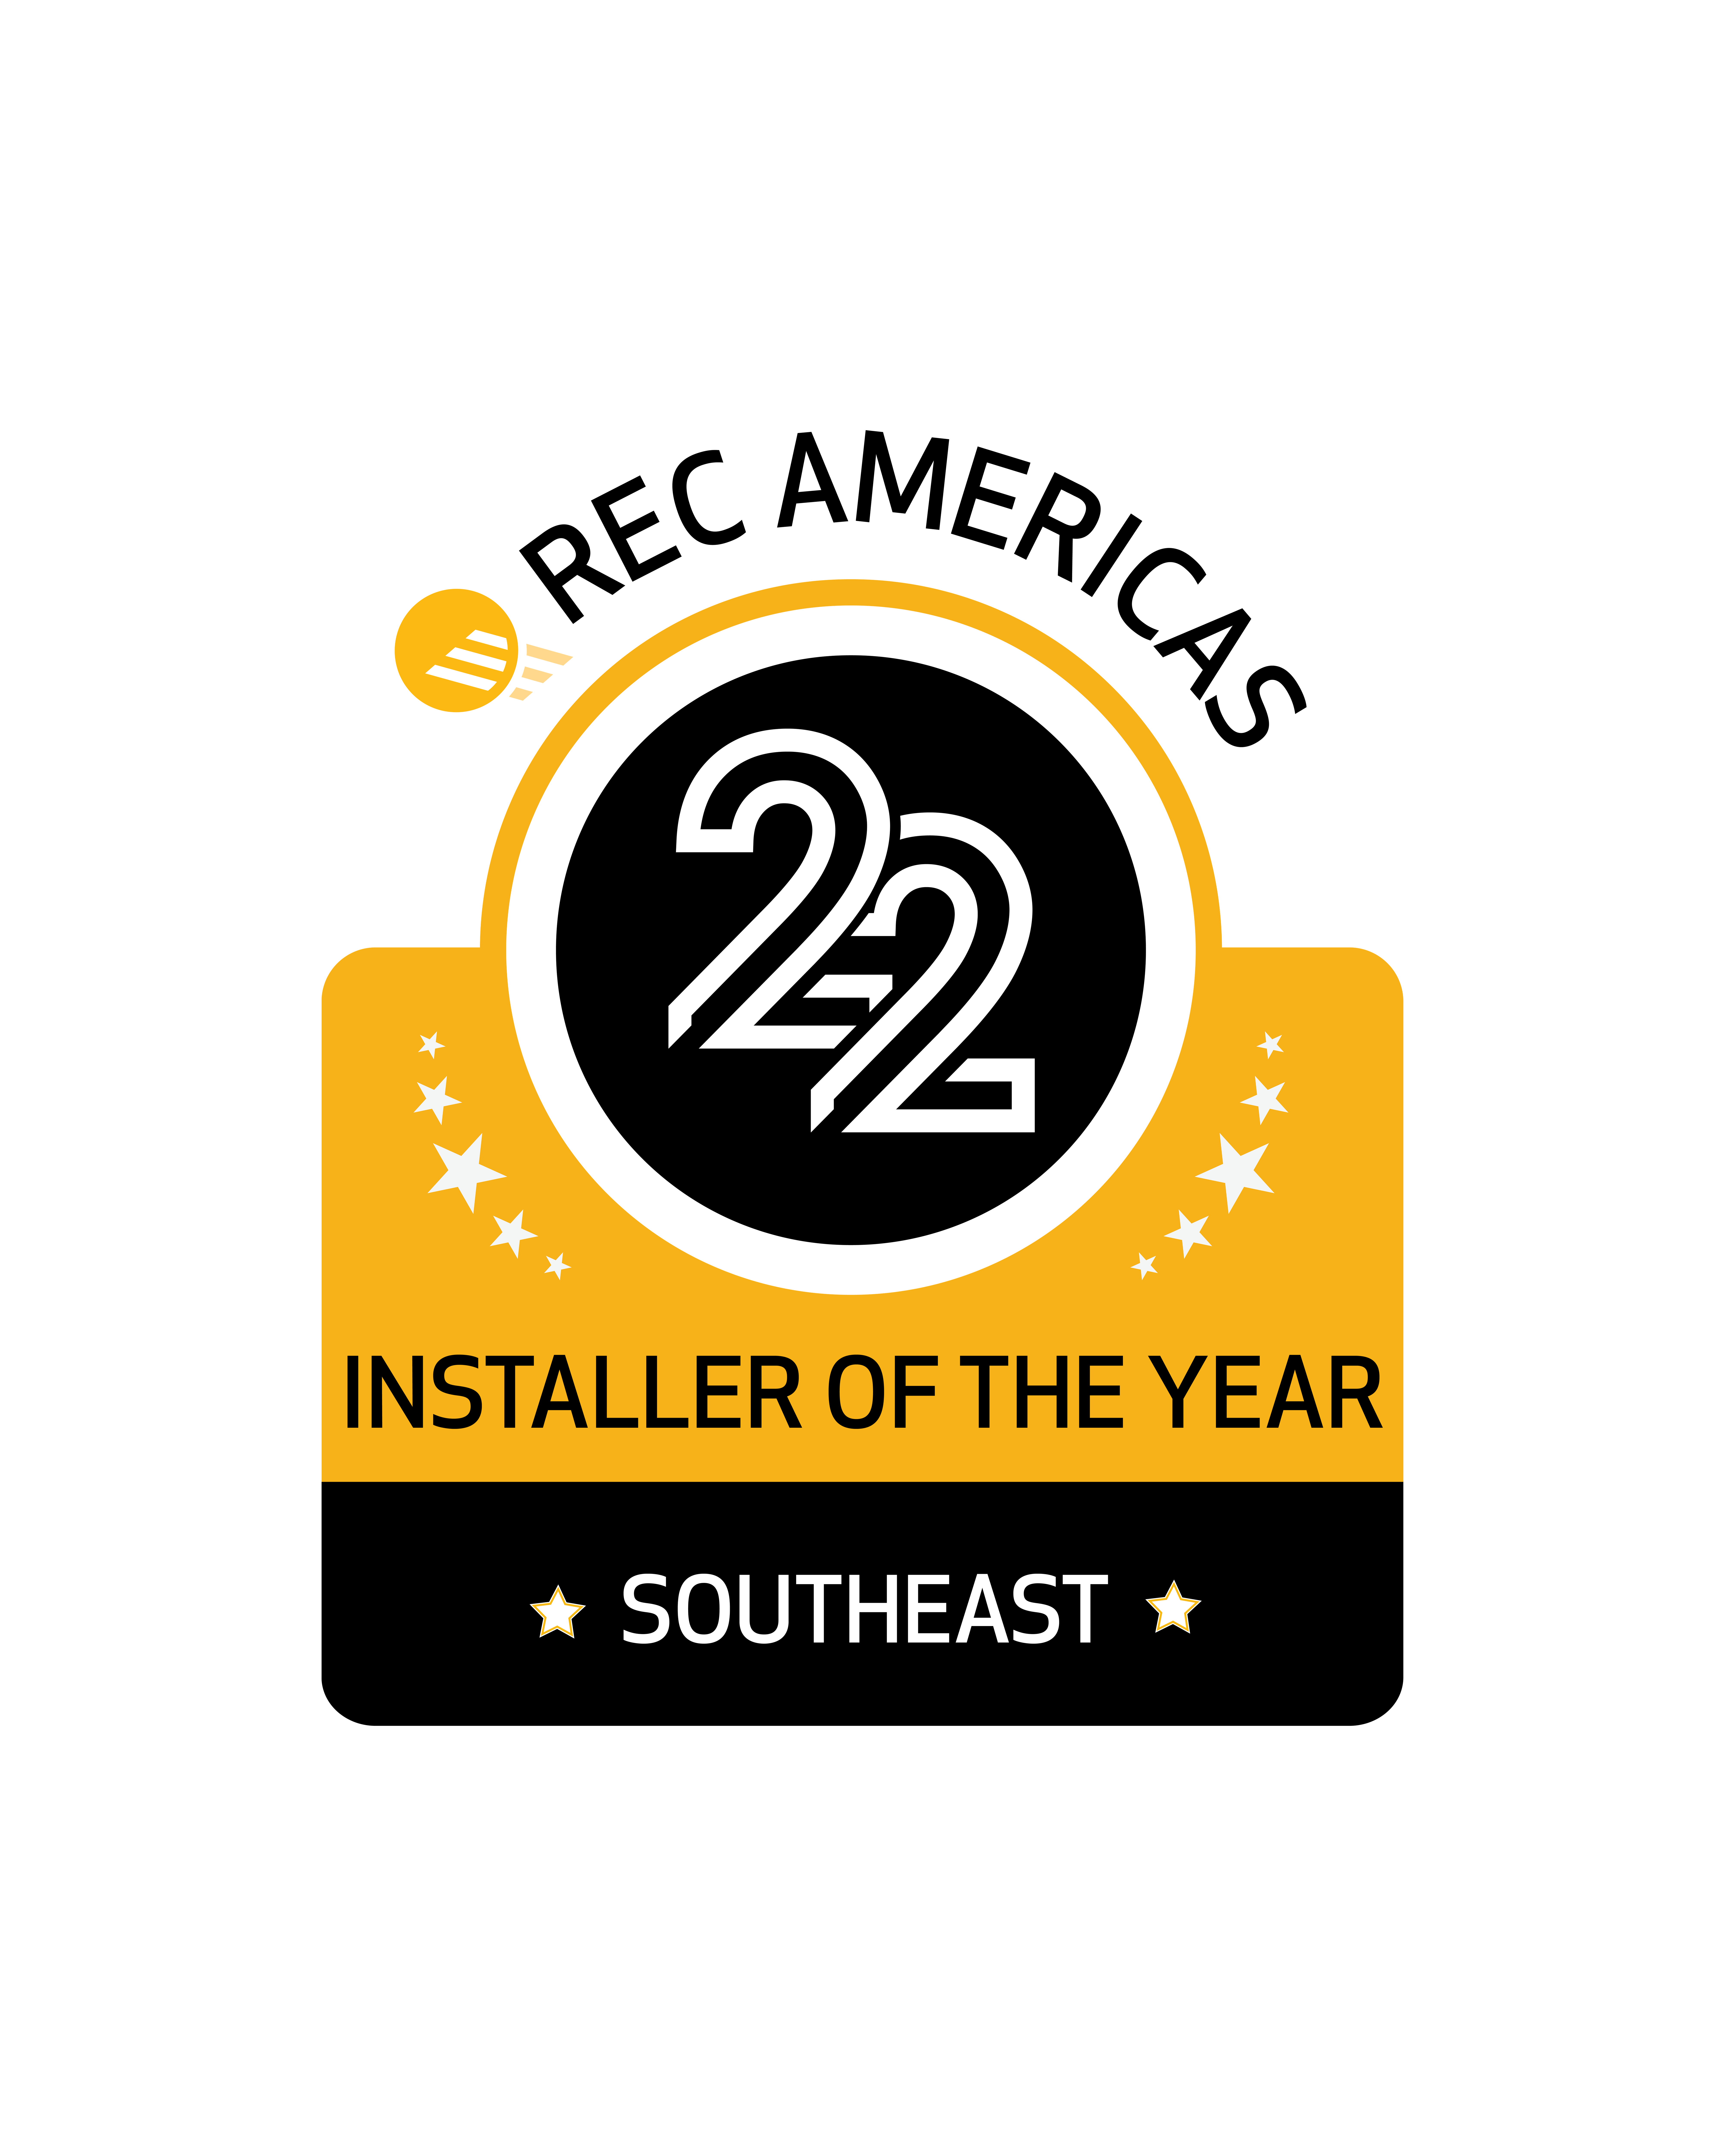 Renu Named as REC’s Installer of the Year in the South East for 2022